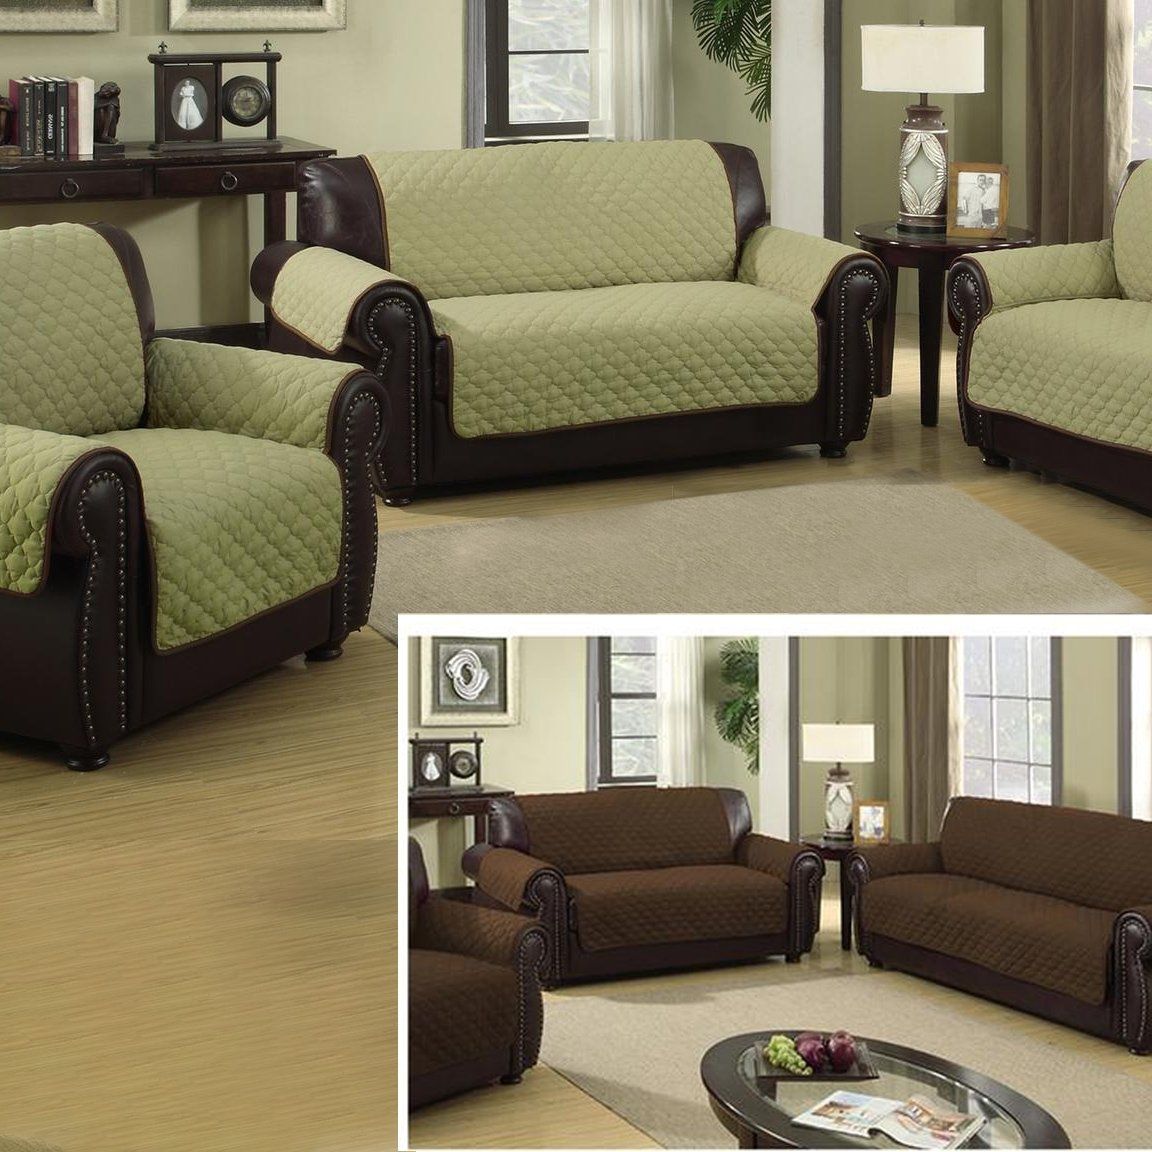 Waterproof Quilted Reversible Furniture Slipcover for Chair, Loveseat, or Sofa / Sage/Chocolate